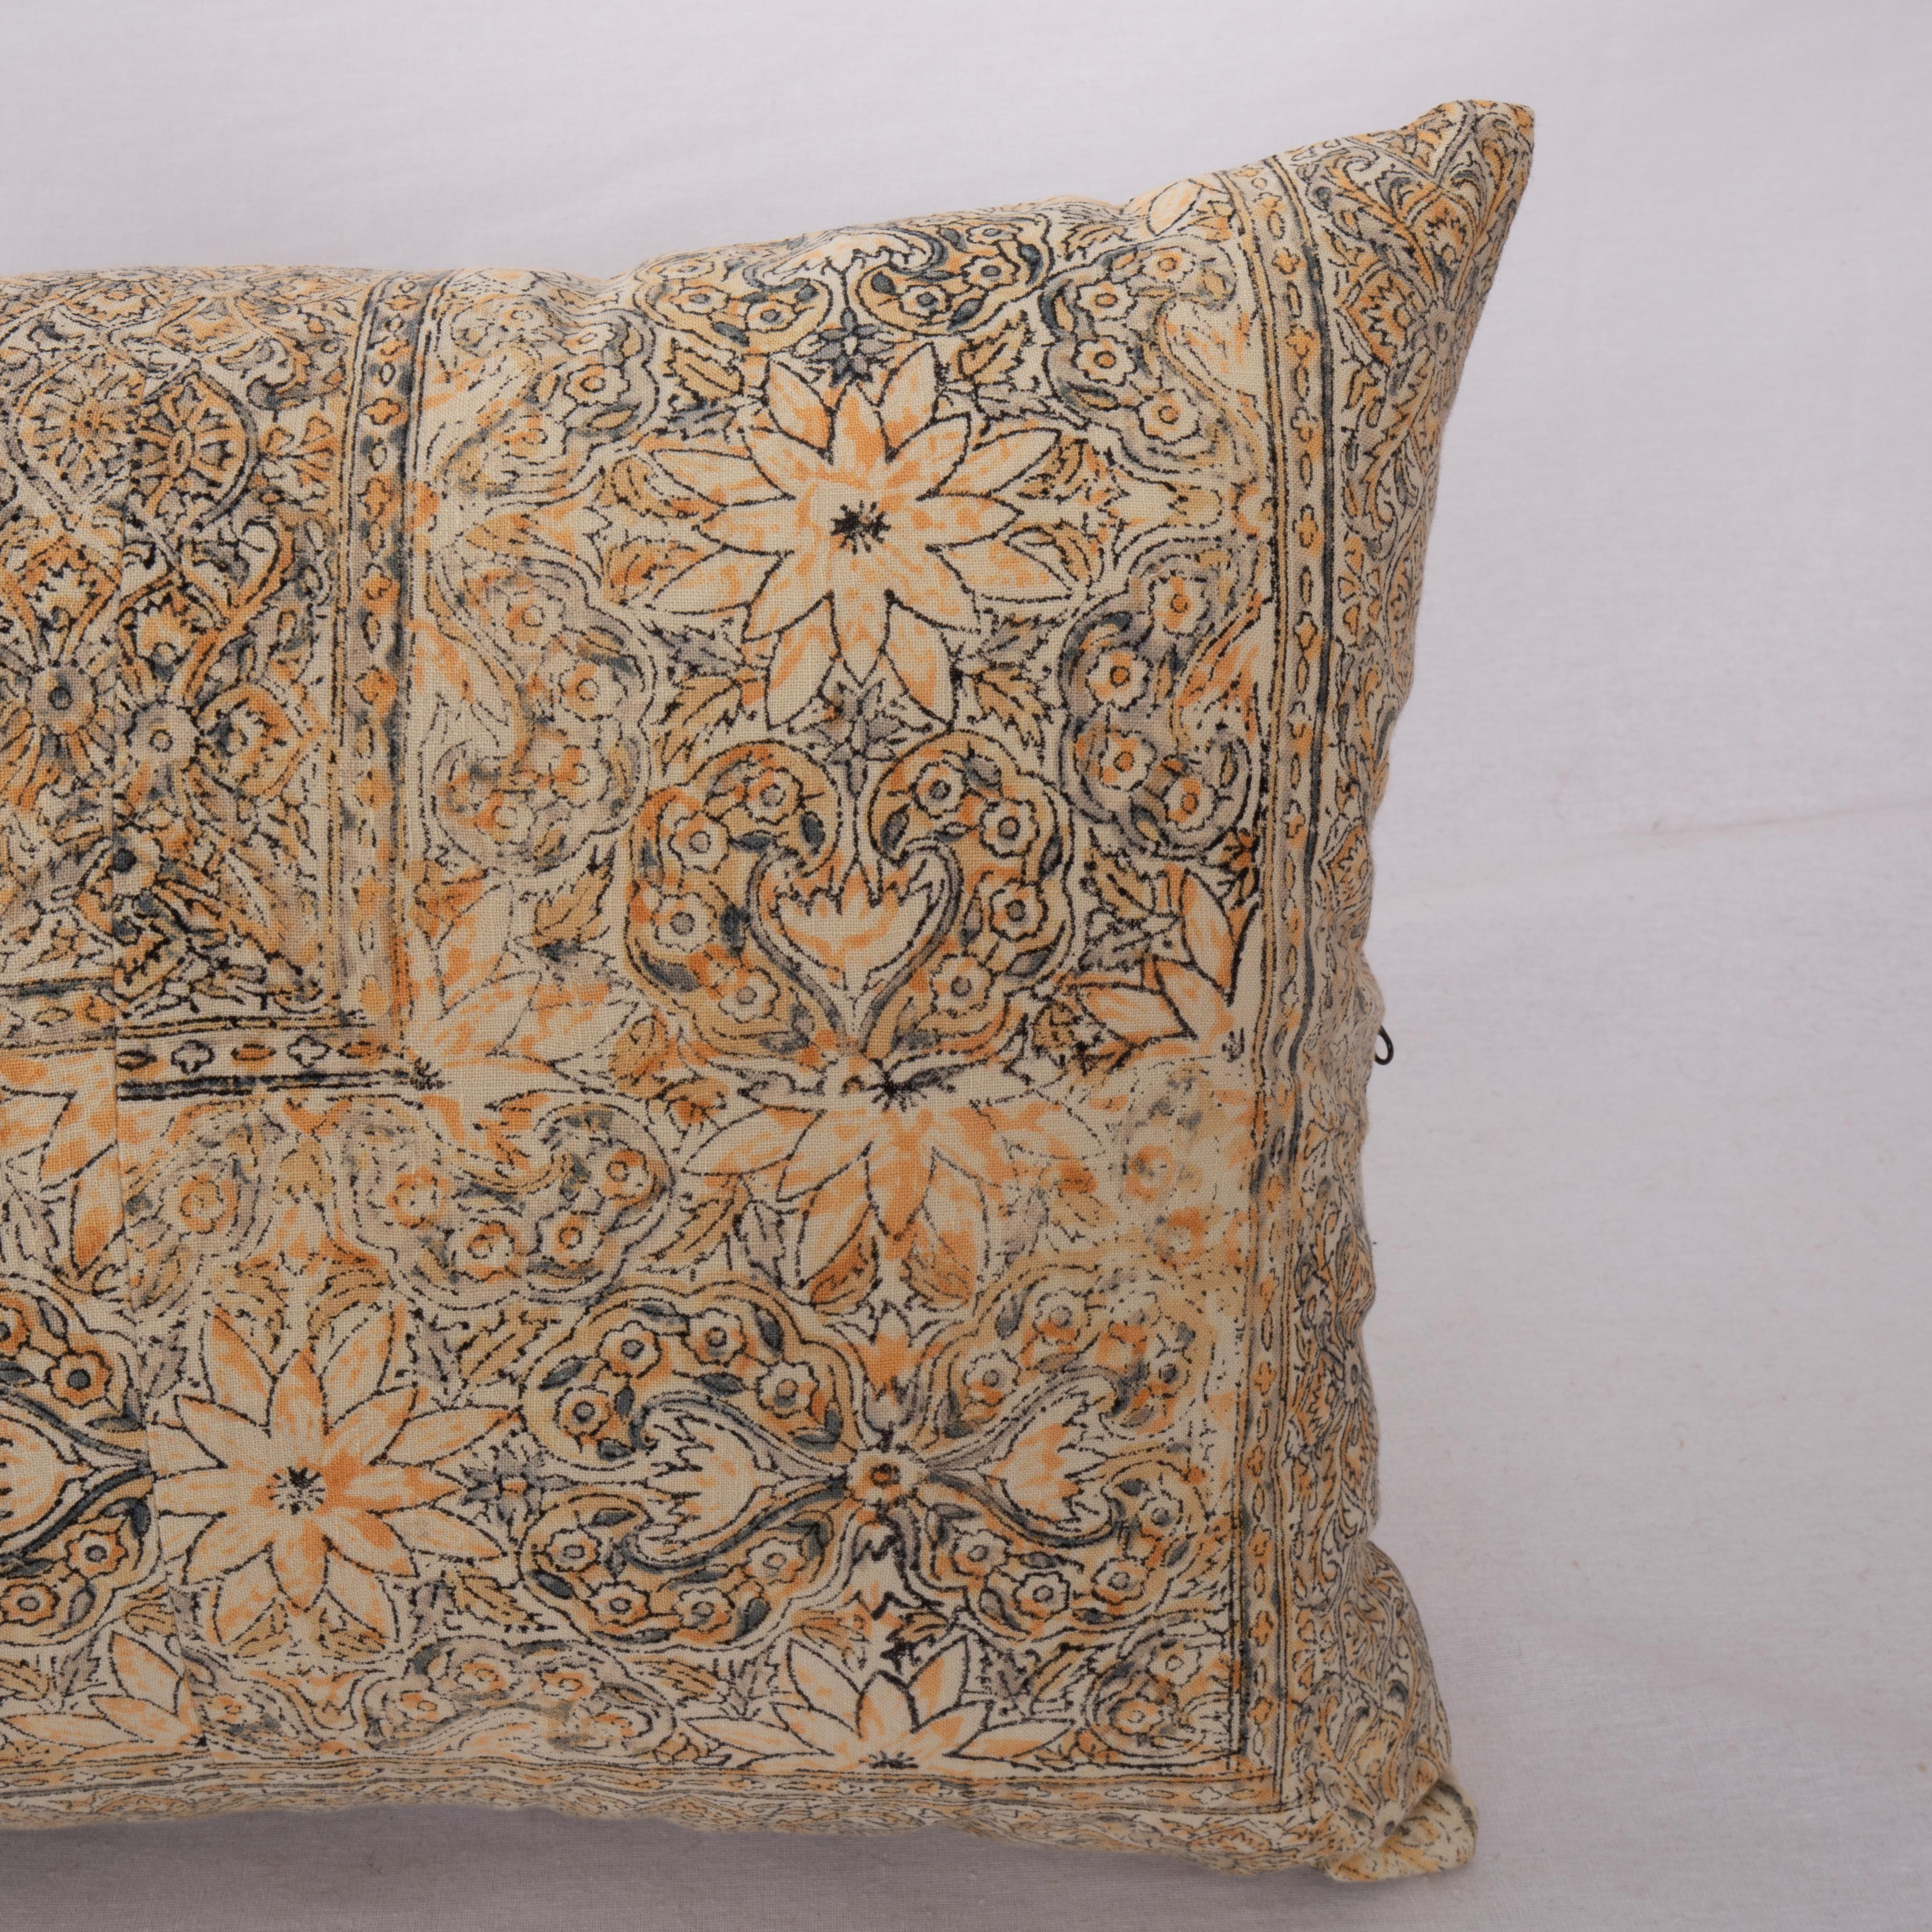 Folk Art Pillow Cover Made from a Vintage Indian Block Printed Textile For Sale